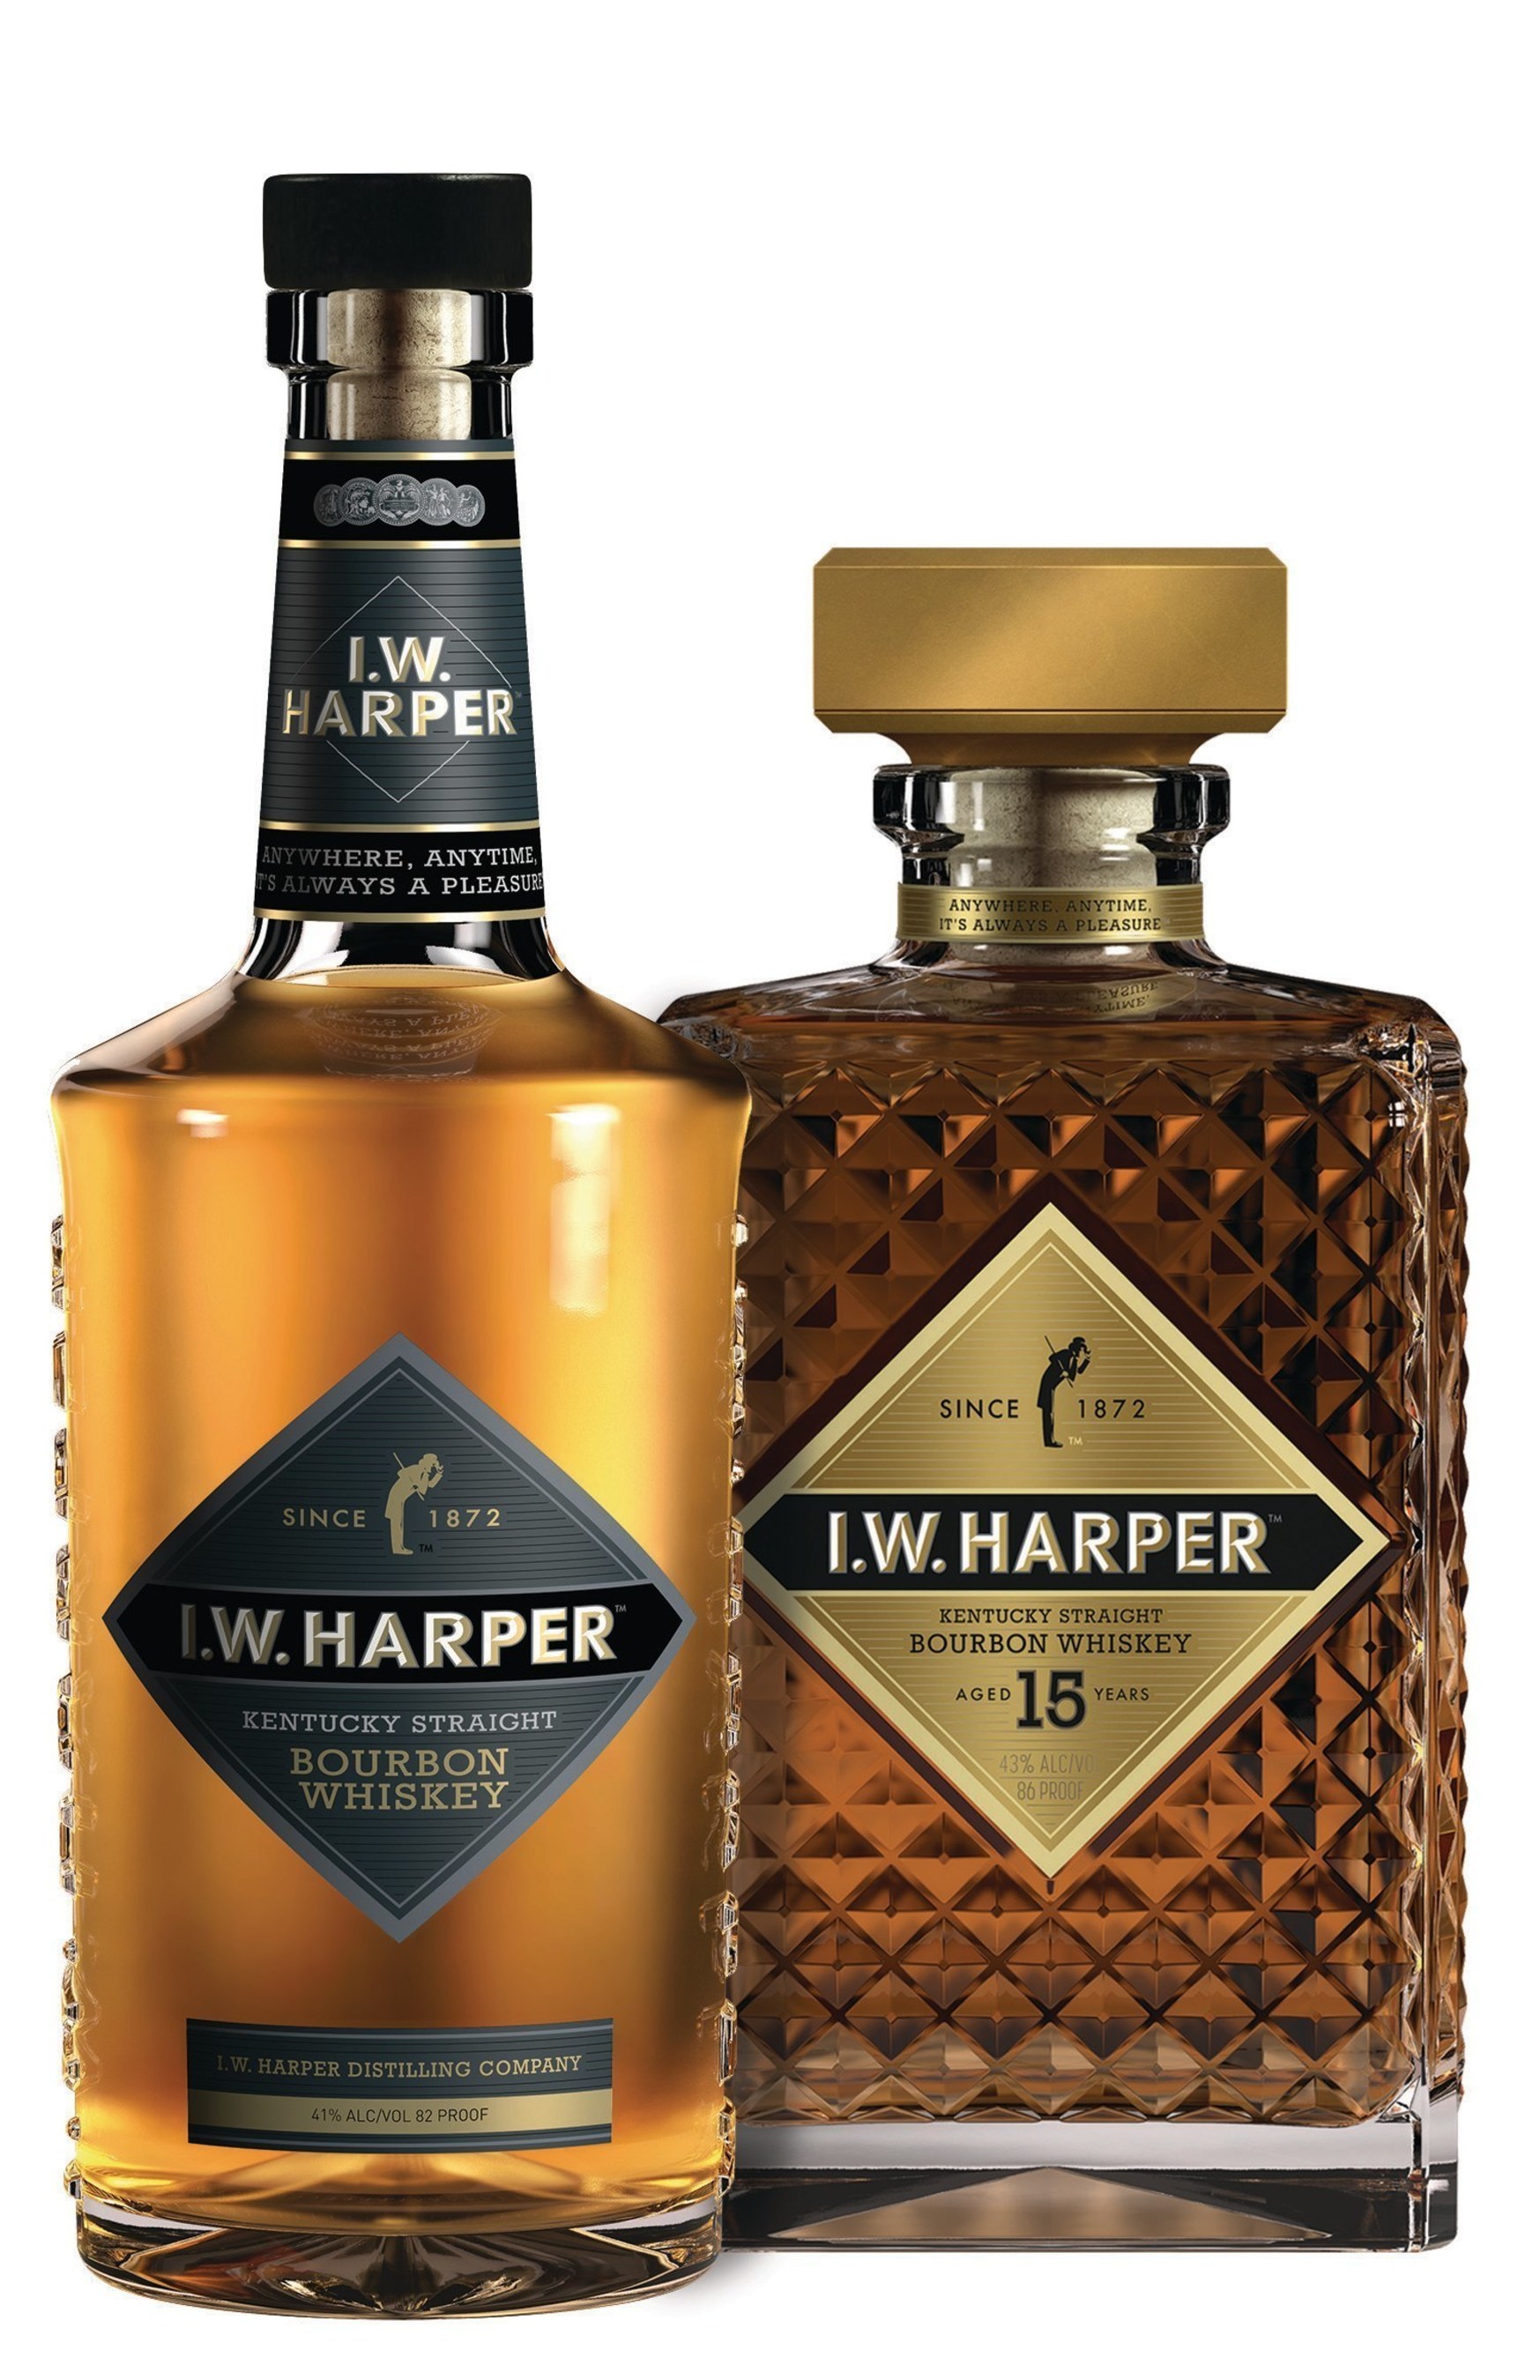 I.W. Harper(TM) Brand Returns Stateside After Two Decades Abroad Releasing I.W. Harper Kentucky Straight Bourbon Whiskey and Limited Edition I.W. Harper 15-Year-Old Kentucky Straight Bourbon Whiskey.